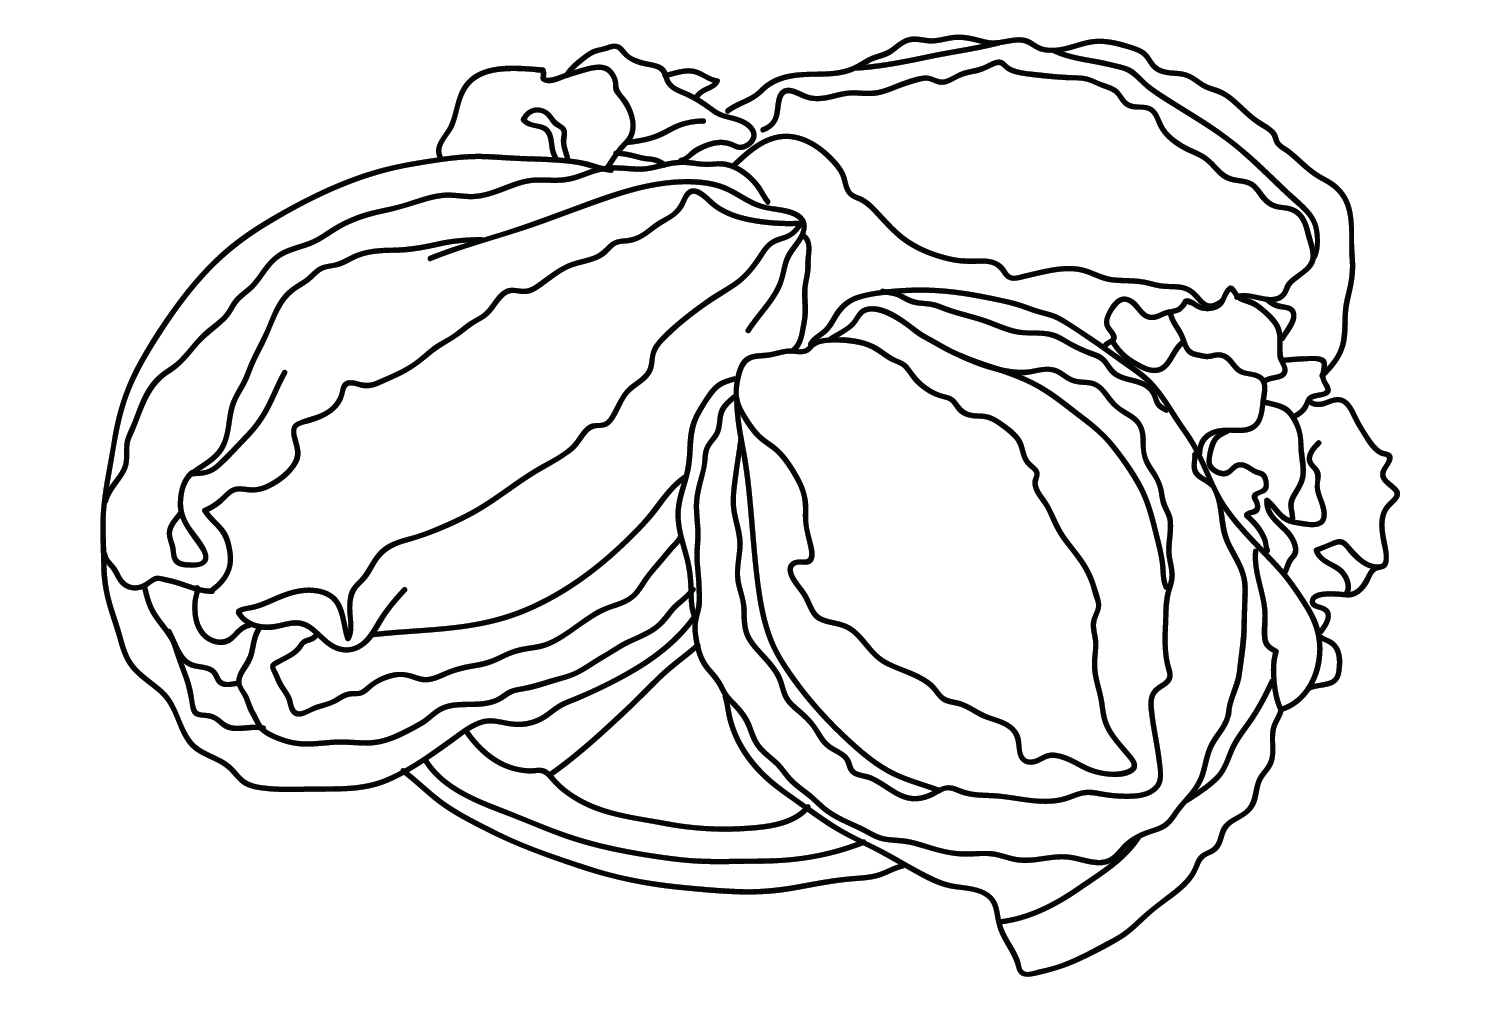 Abalone Pictures to Color from Abalone